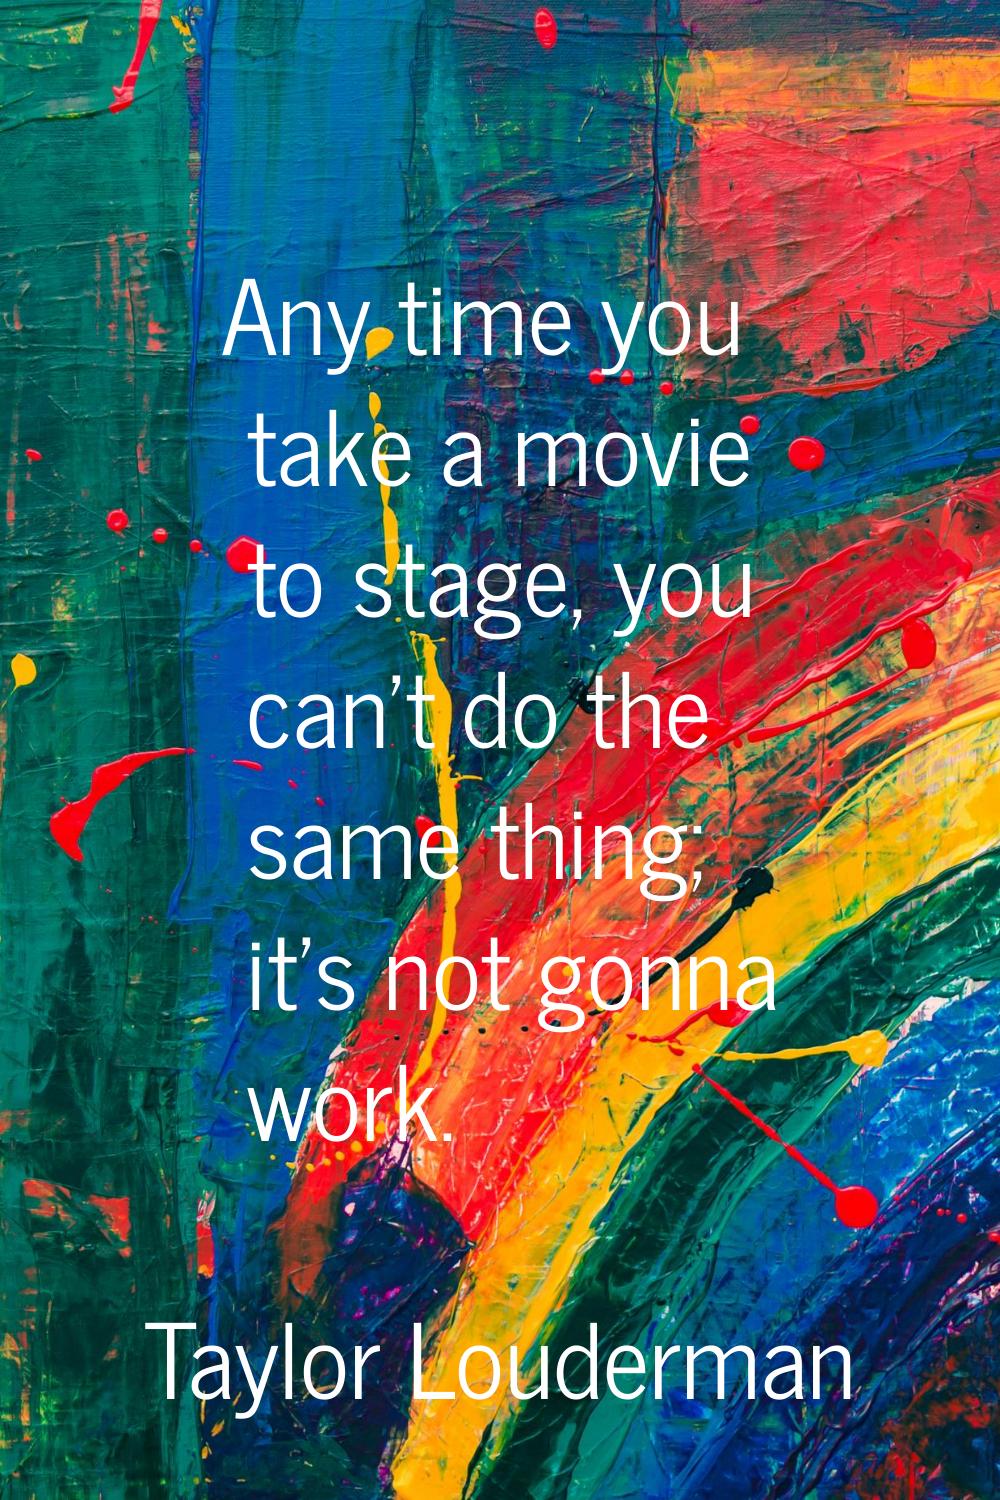 Any time you take a movie to stage, you can't do the same thing; it's not gonna work.